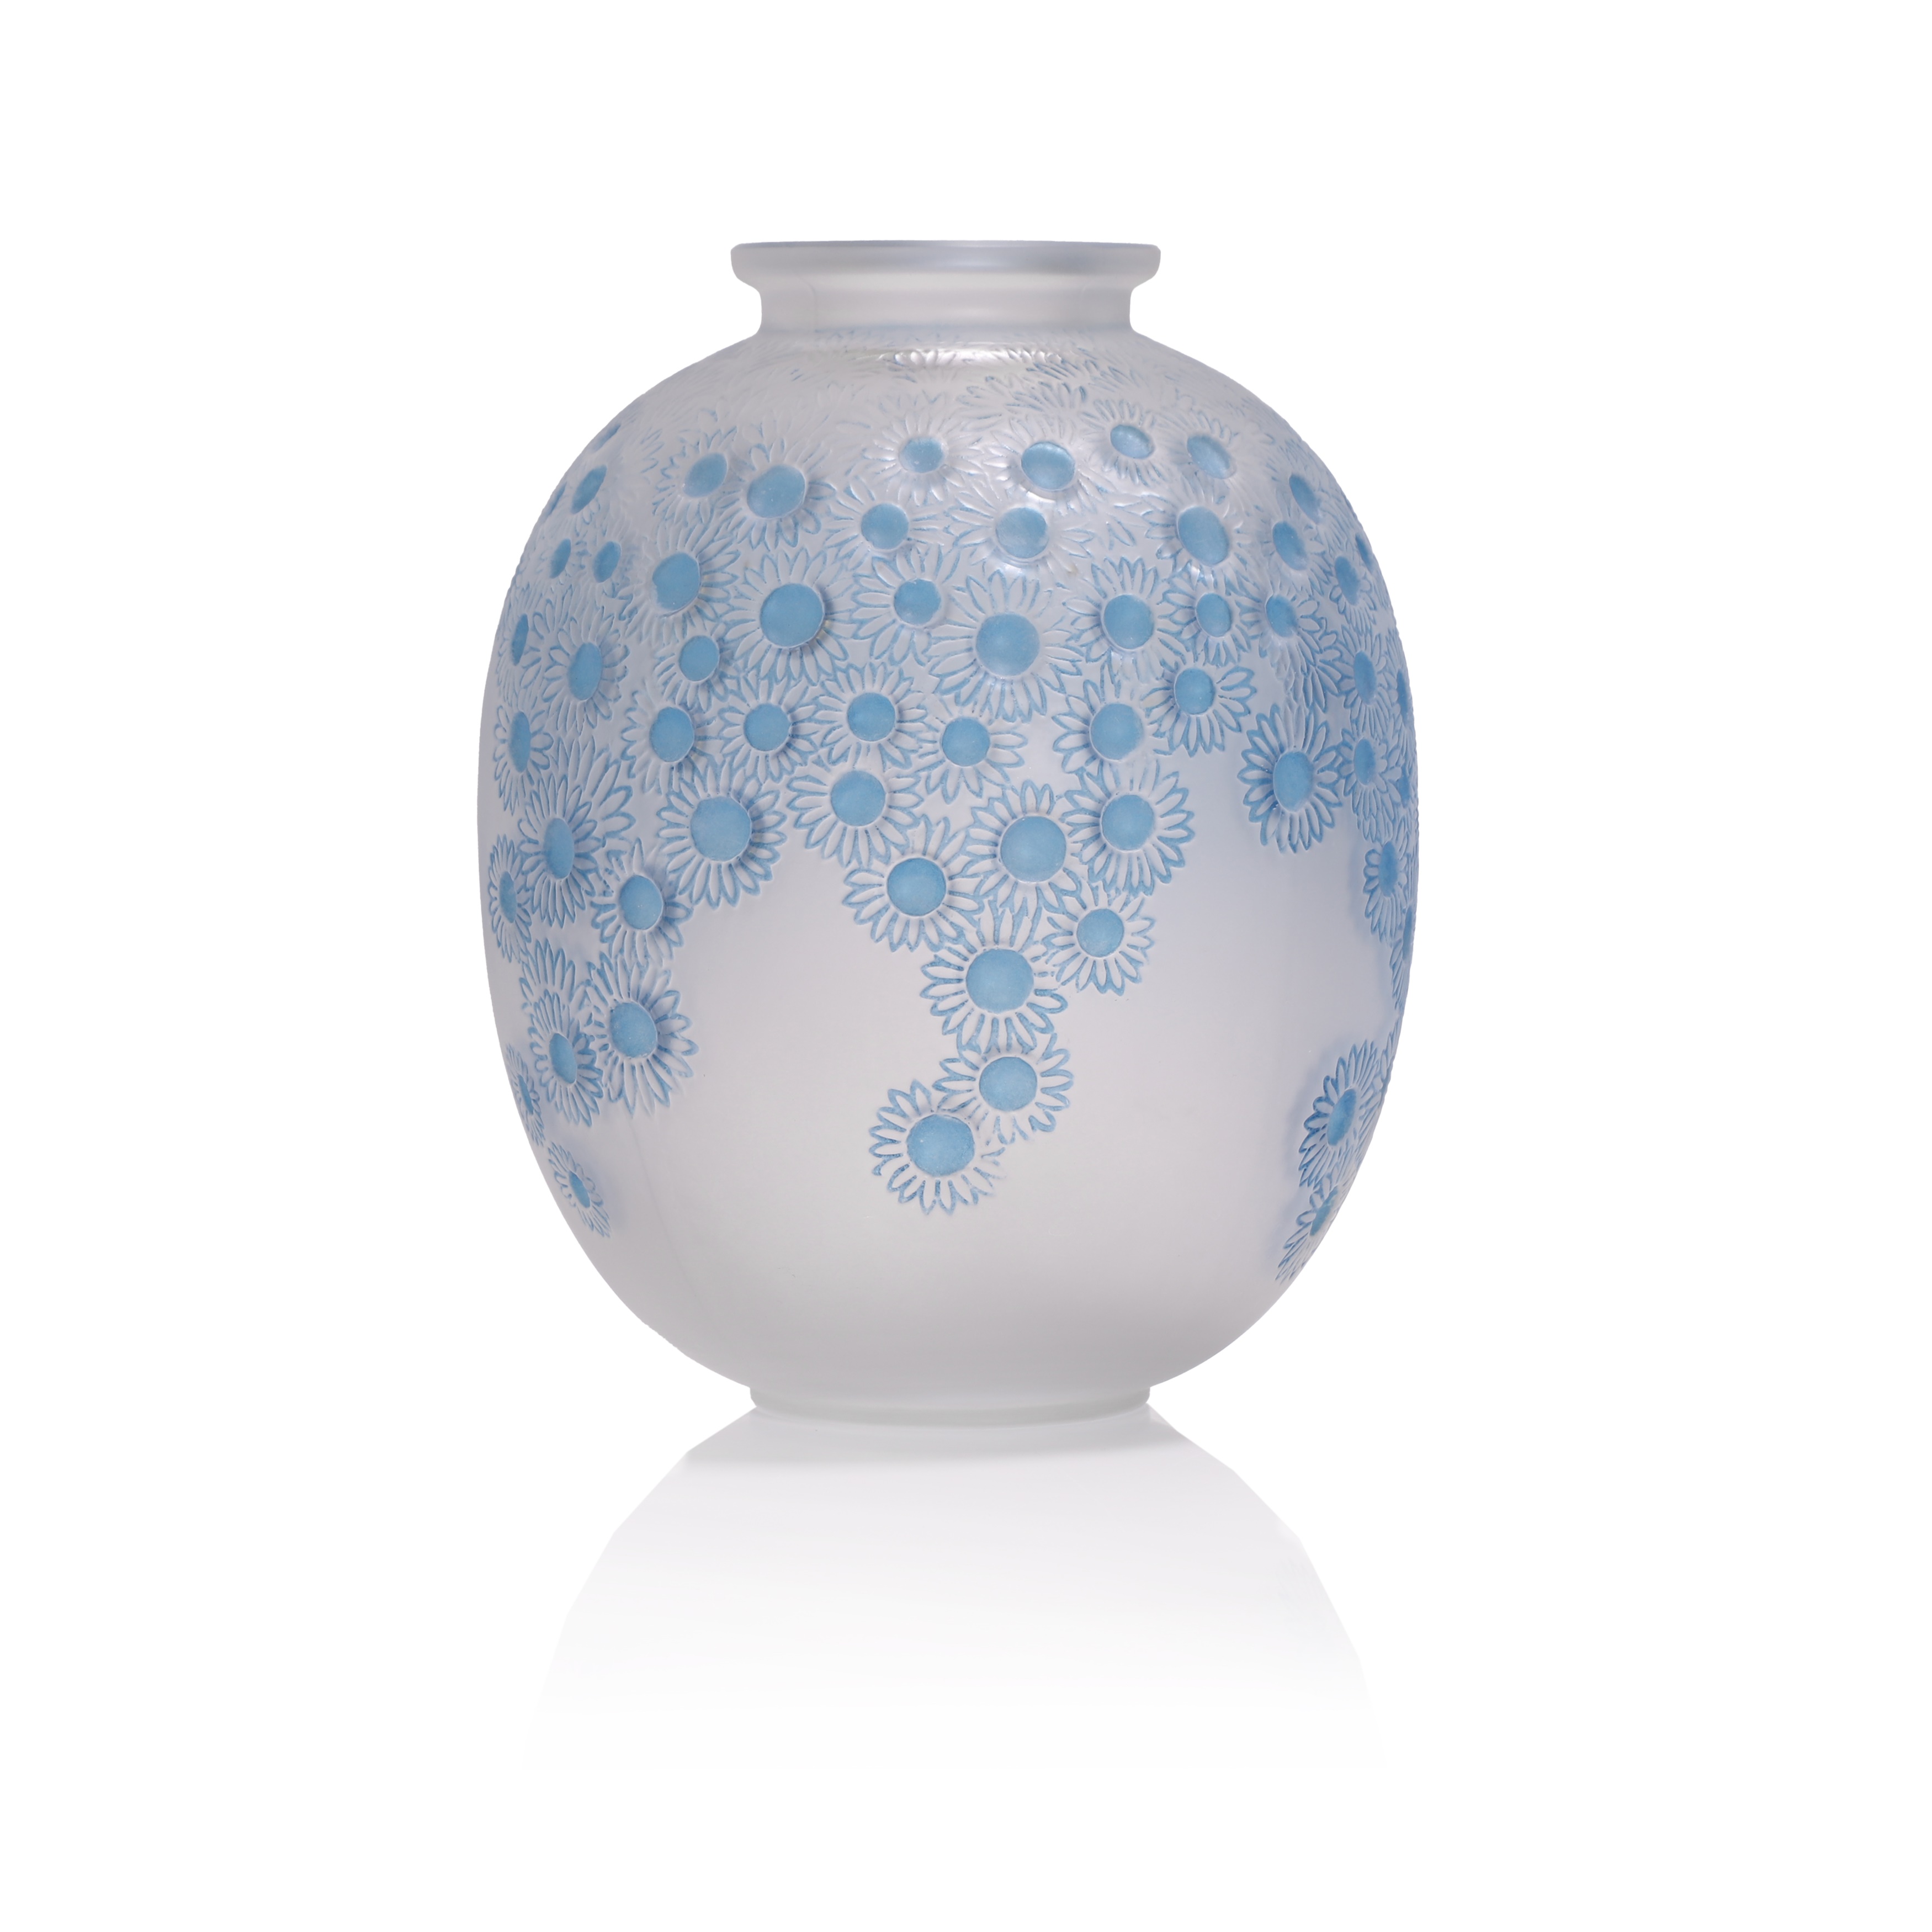 René Lalique (French, 1860-1945) a 'Marguerites' vase, No. 922, designed in 1923, stained and frosted glass, acid-etched 'R LALIQUE FRANCE', 20.5cm high (£2,000-3,000)